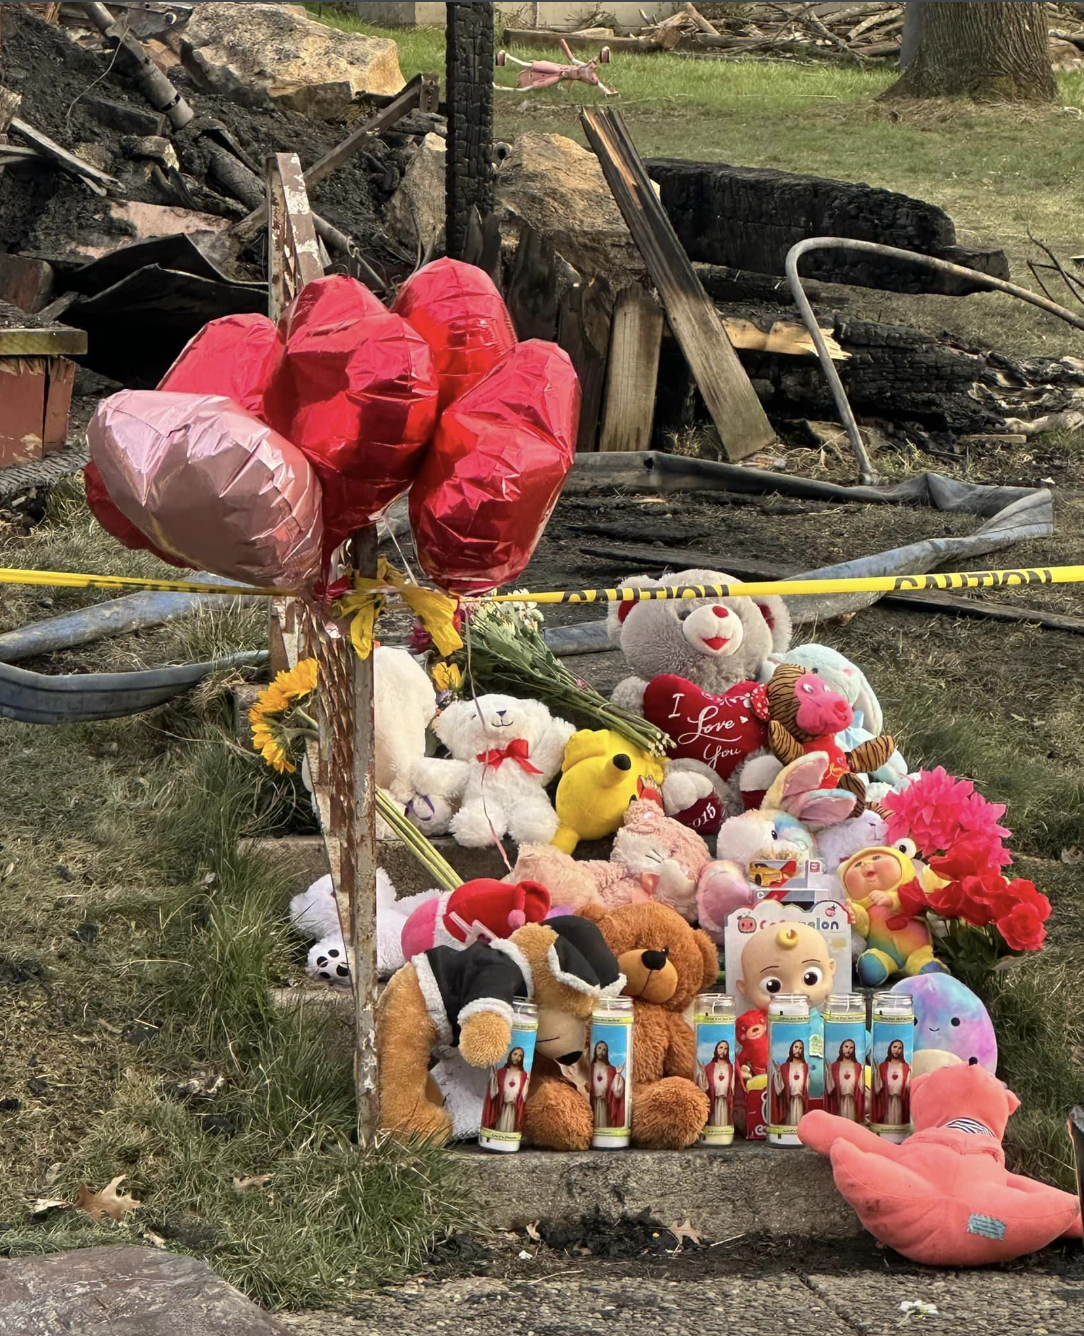 Flowers and balloons placed at the memorial site for the King Family, as seen in a Facebook post dated March 21, 2024 | Source: Facebook/JenniferBorrasso